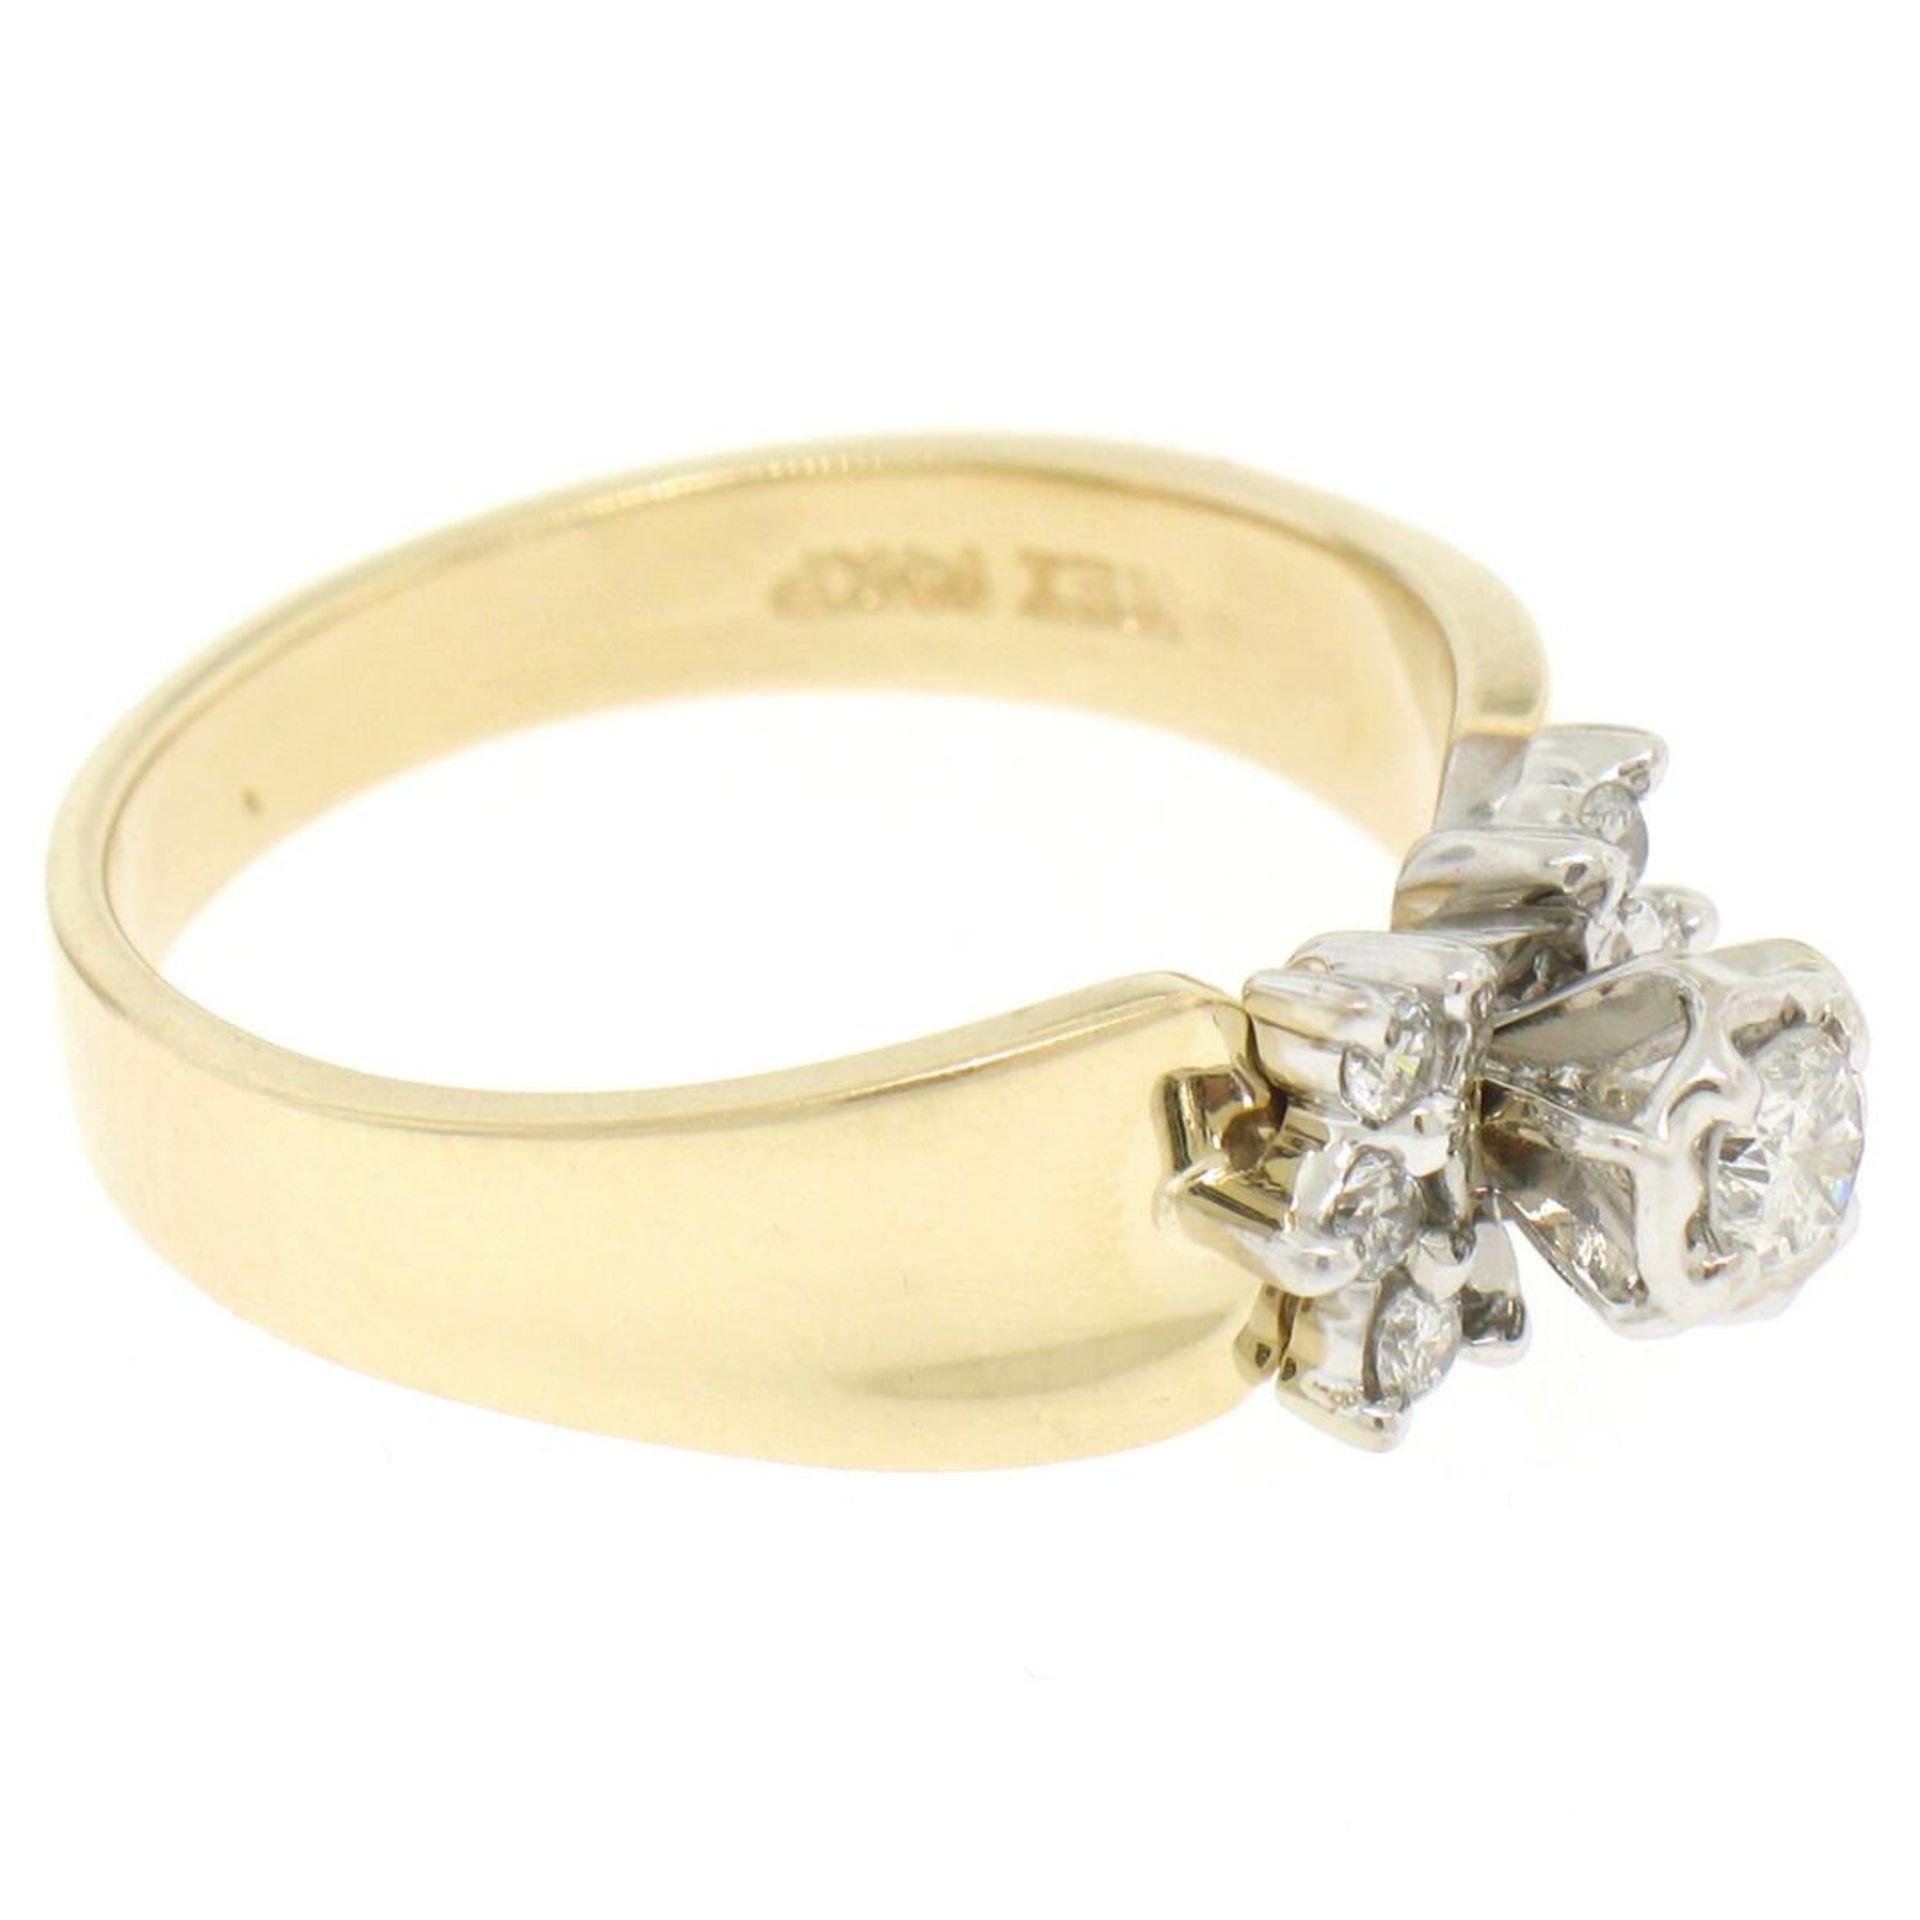 14k Two Tone Gold 0.30 ctw Illusion Set Solitaire Diamond Engagement Ring - Image 7 of 8